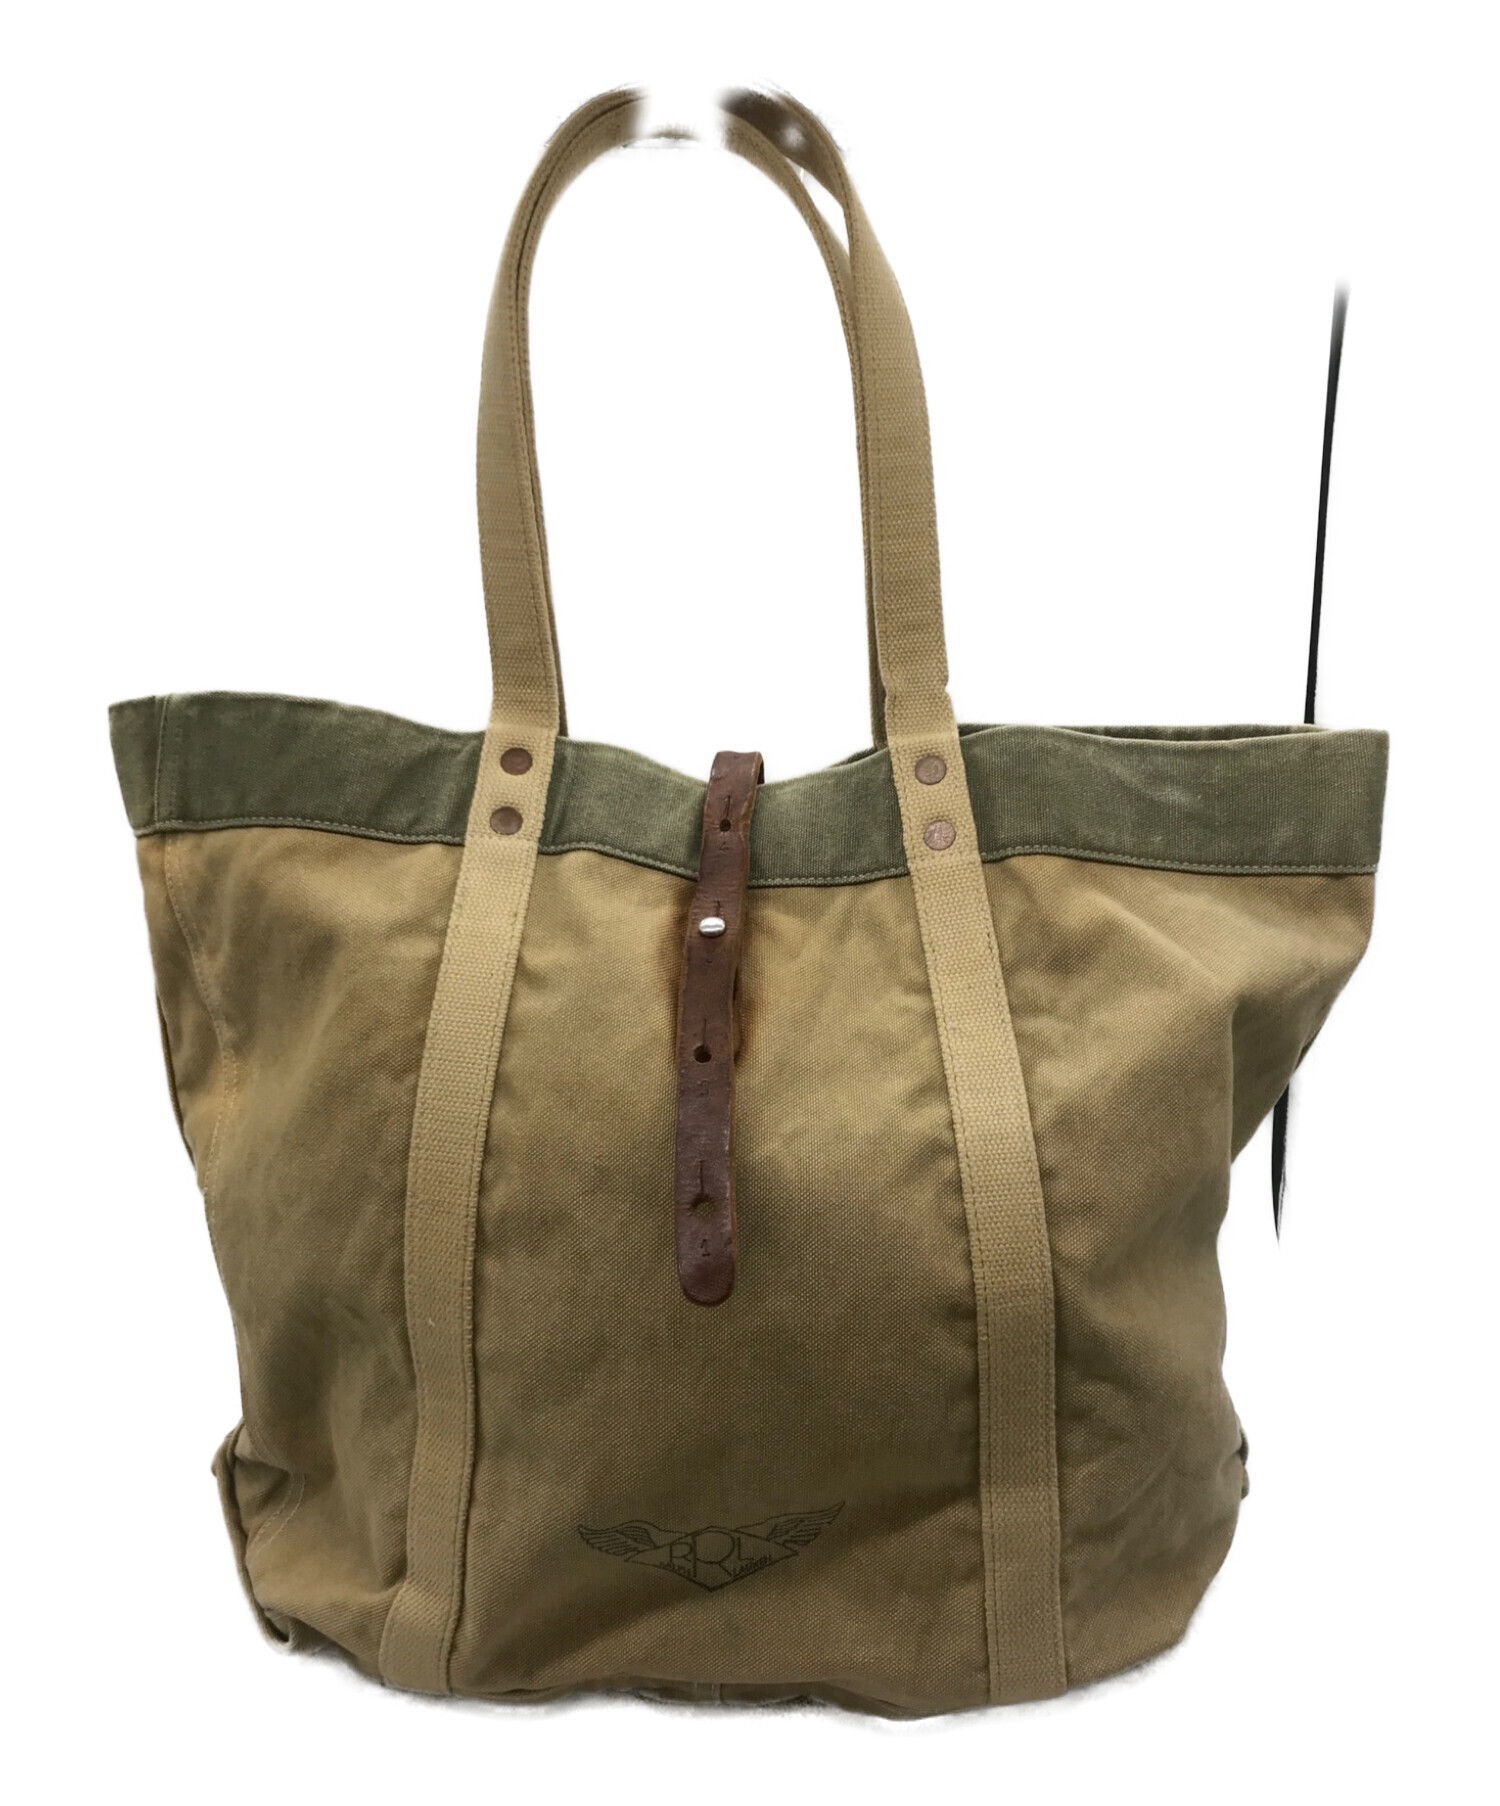 USED RRL CANVAS TOTE BAG横約48センチ - トートバッグ